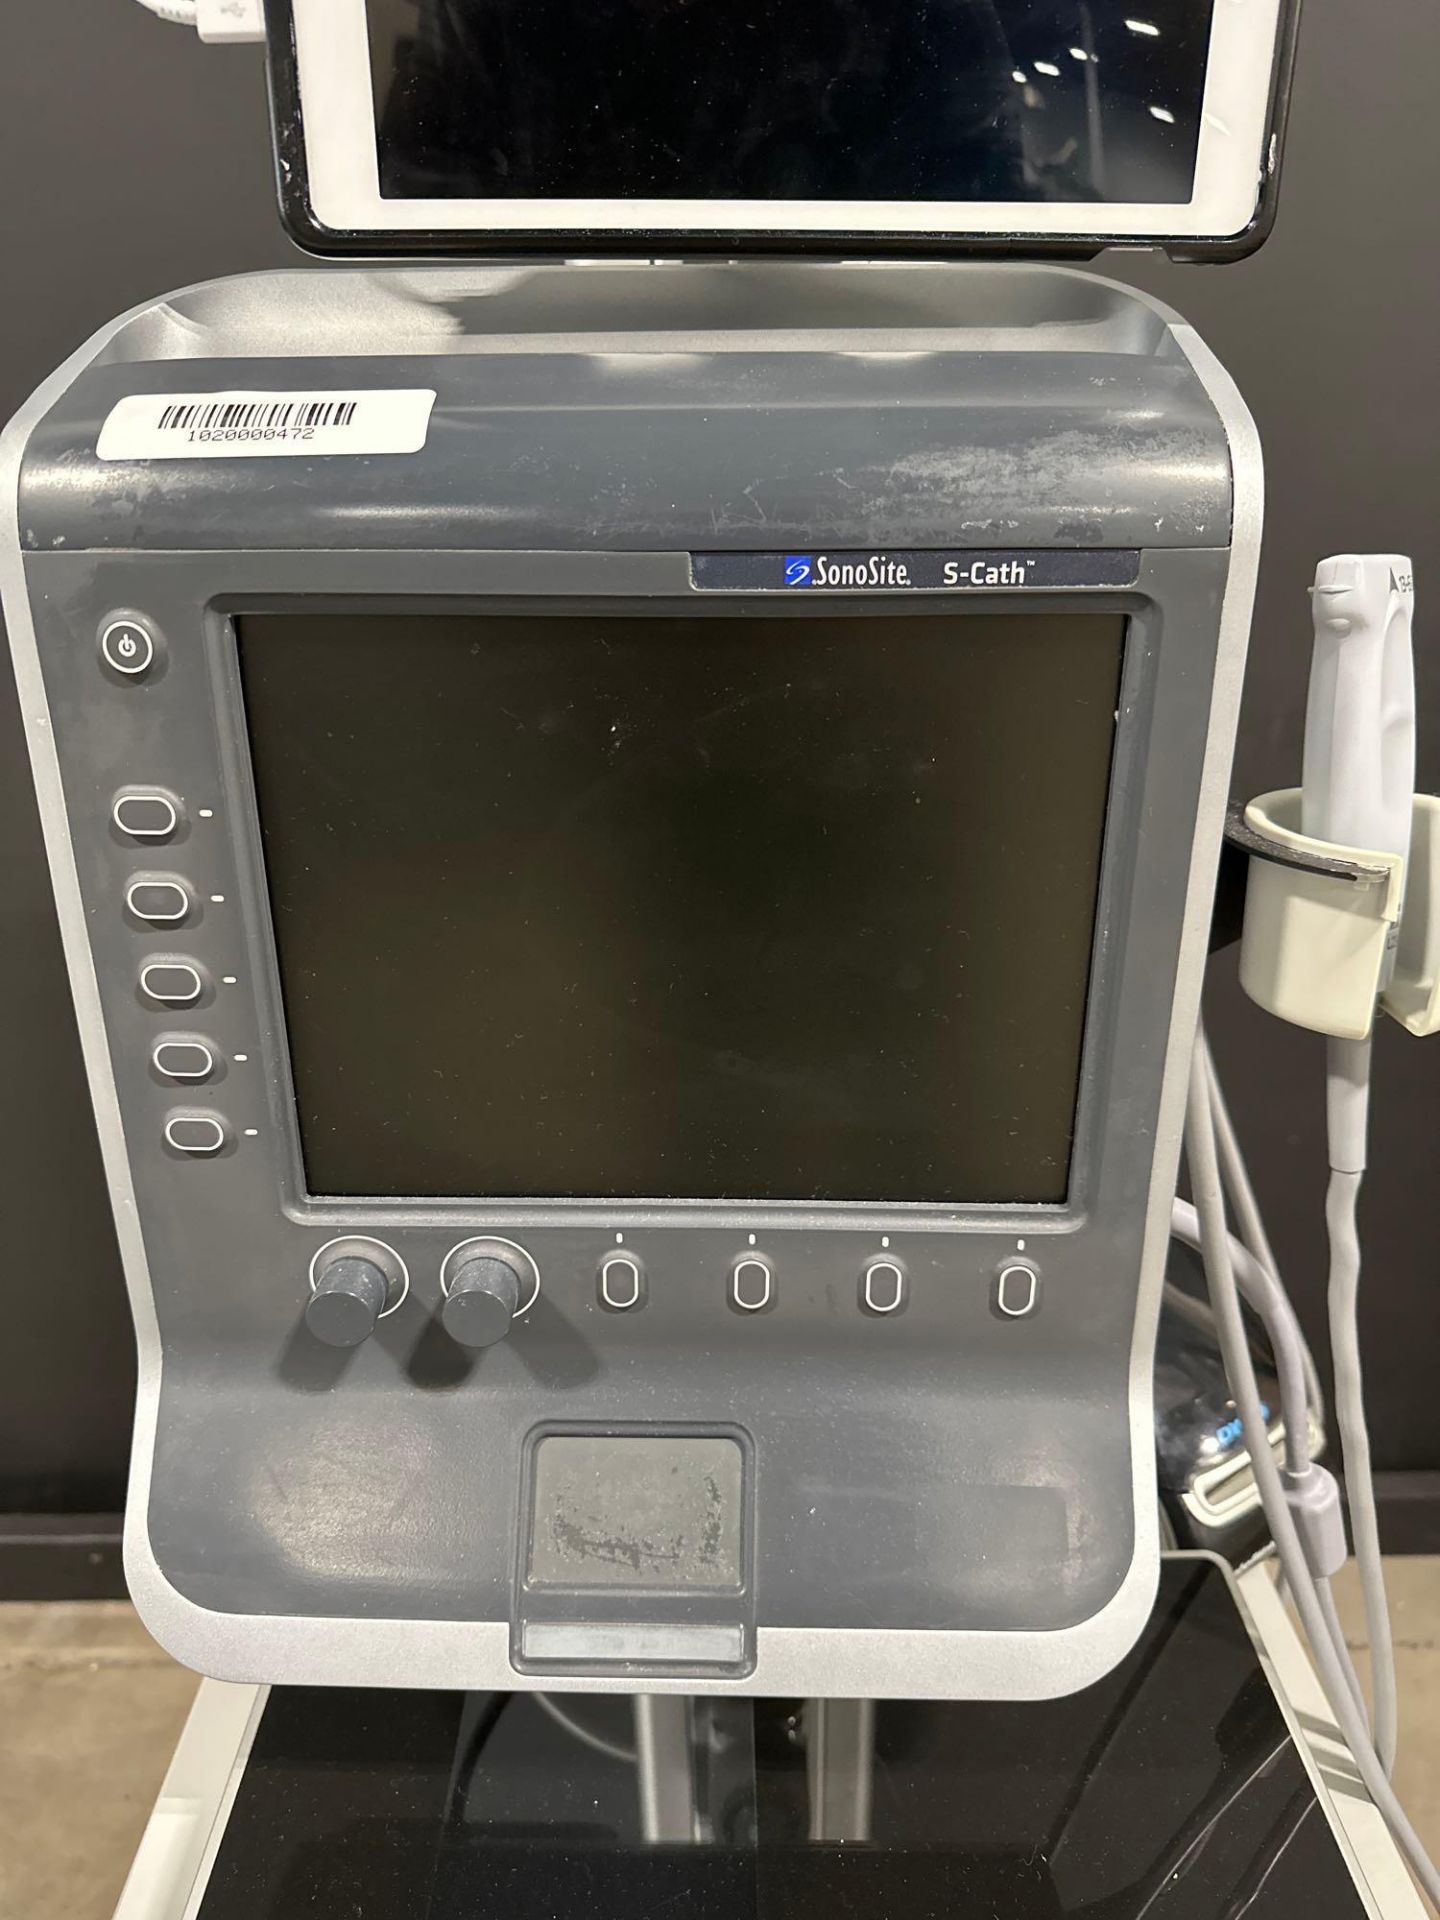 SONOSITE S CATH ULTRASOUND SYSTEM - Image 5 of 6